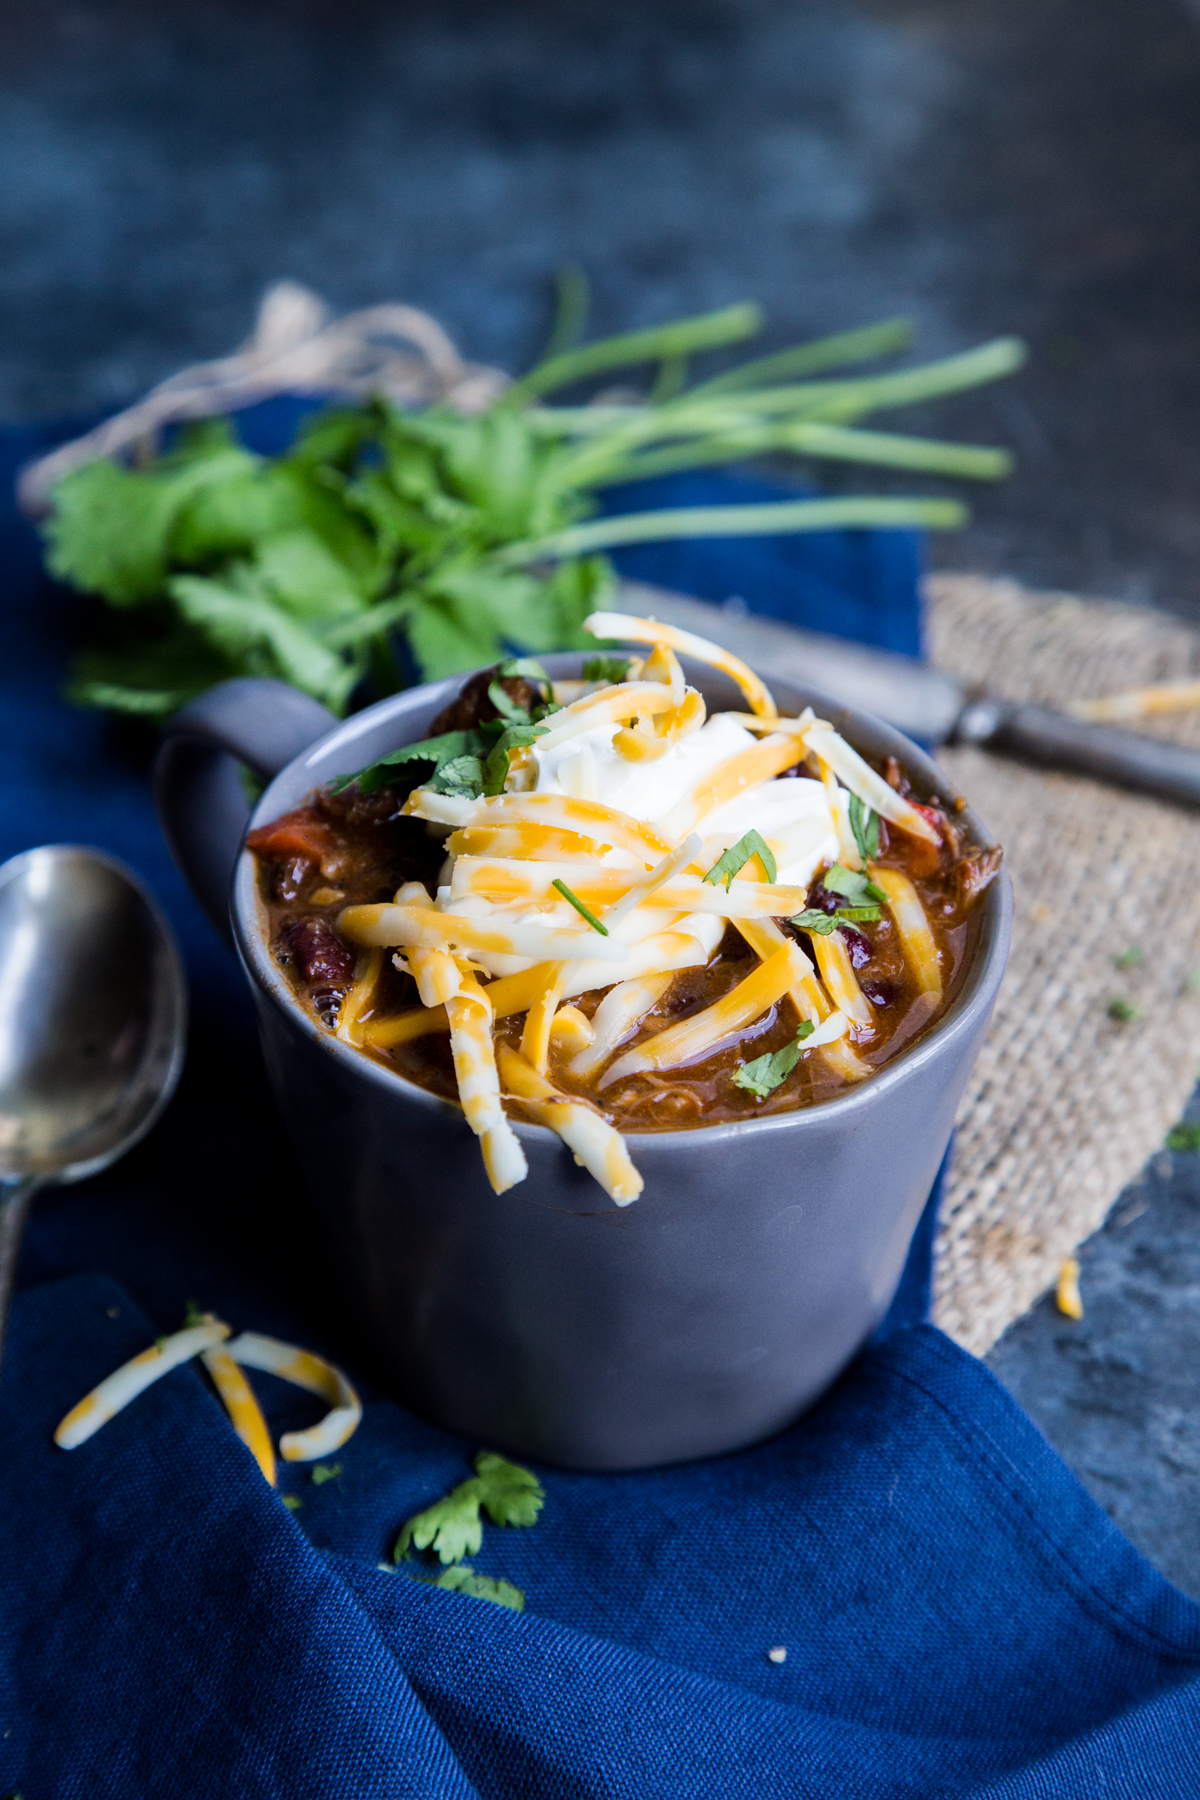 This low and slow cooked chili is packed with shredded beef and beans, and then topped with cheese for the most excellent chili con carne you have ever had! 